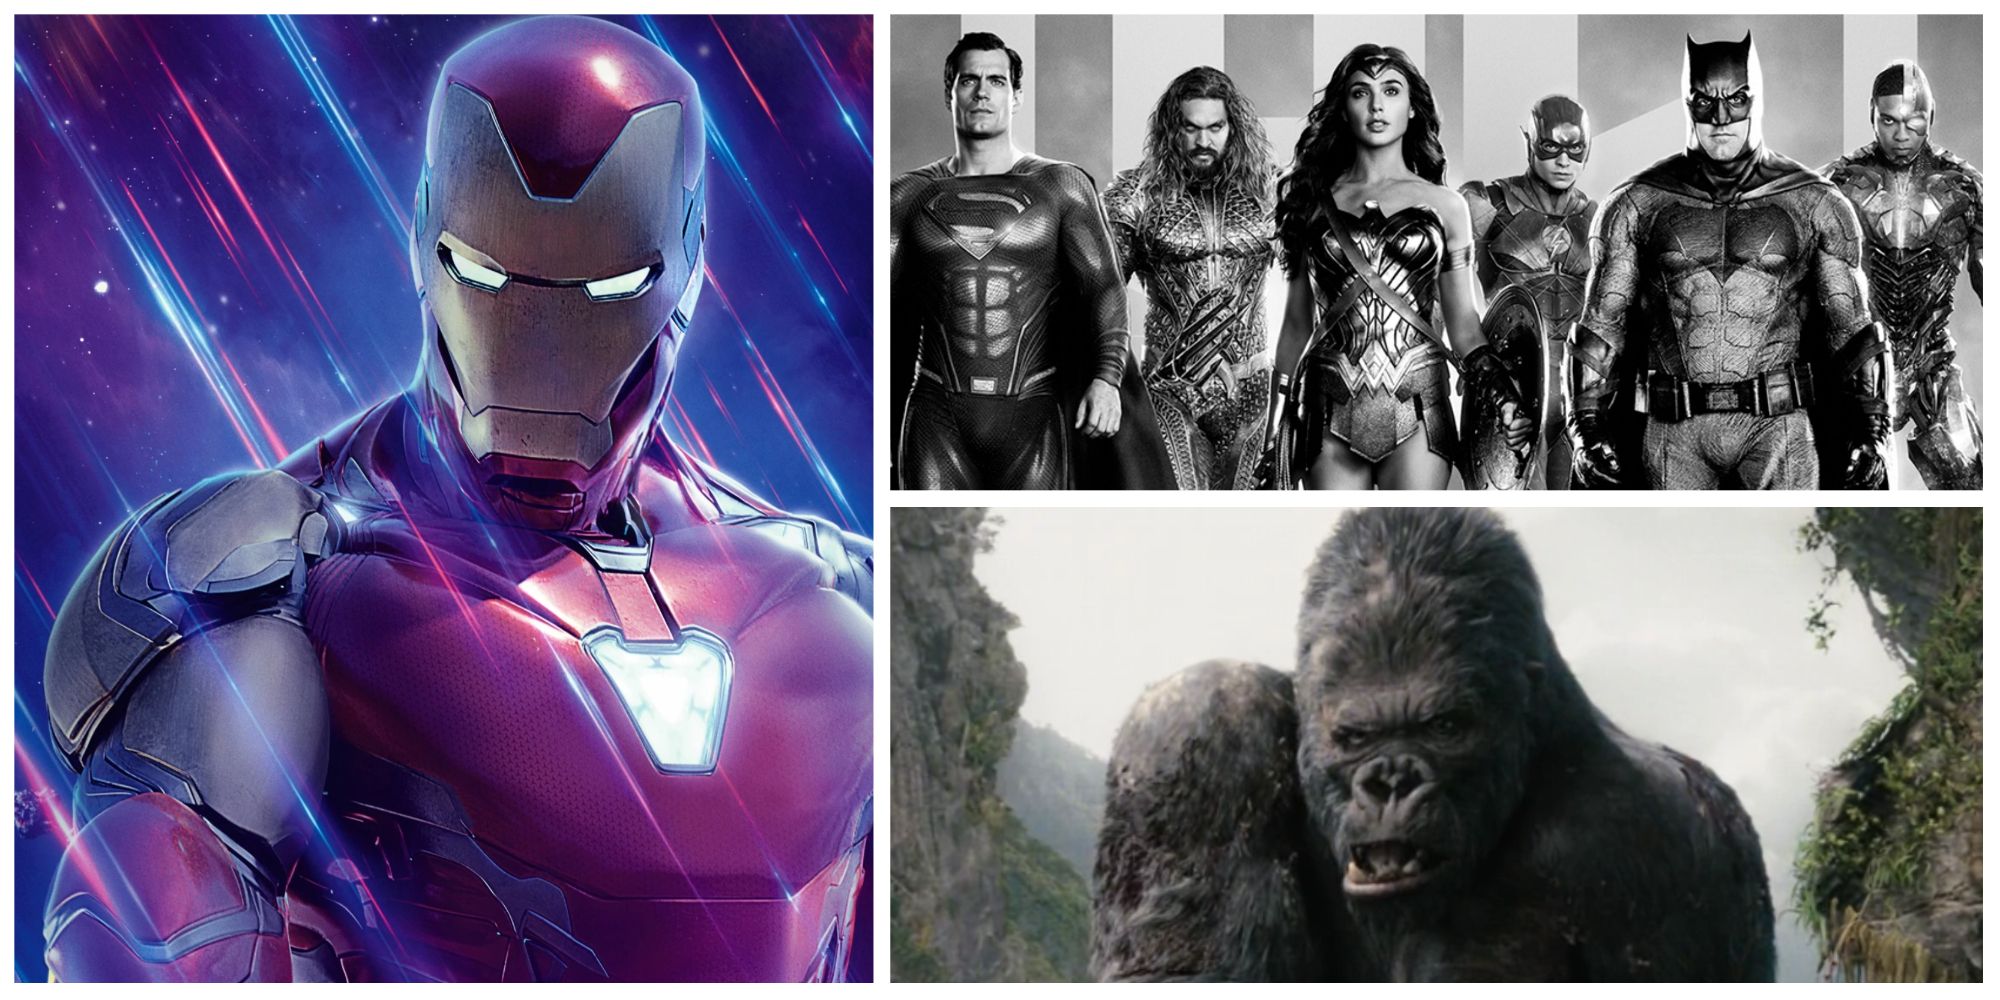 iron man from avengers endgame, the justice league from zack snyder, peter jackson's king kong